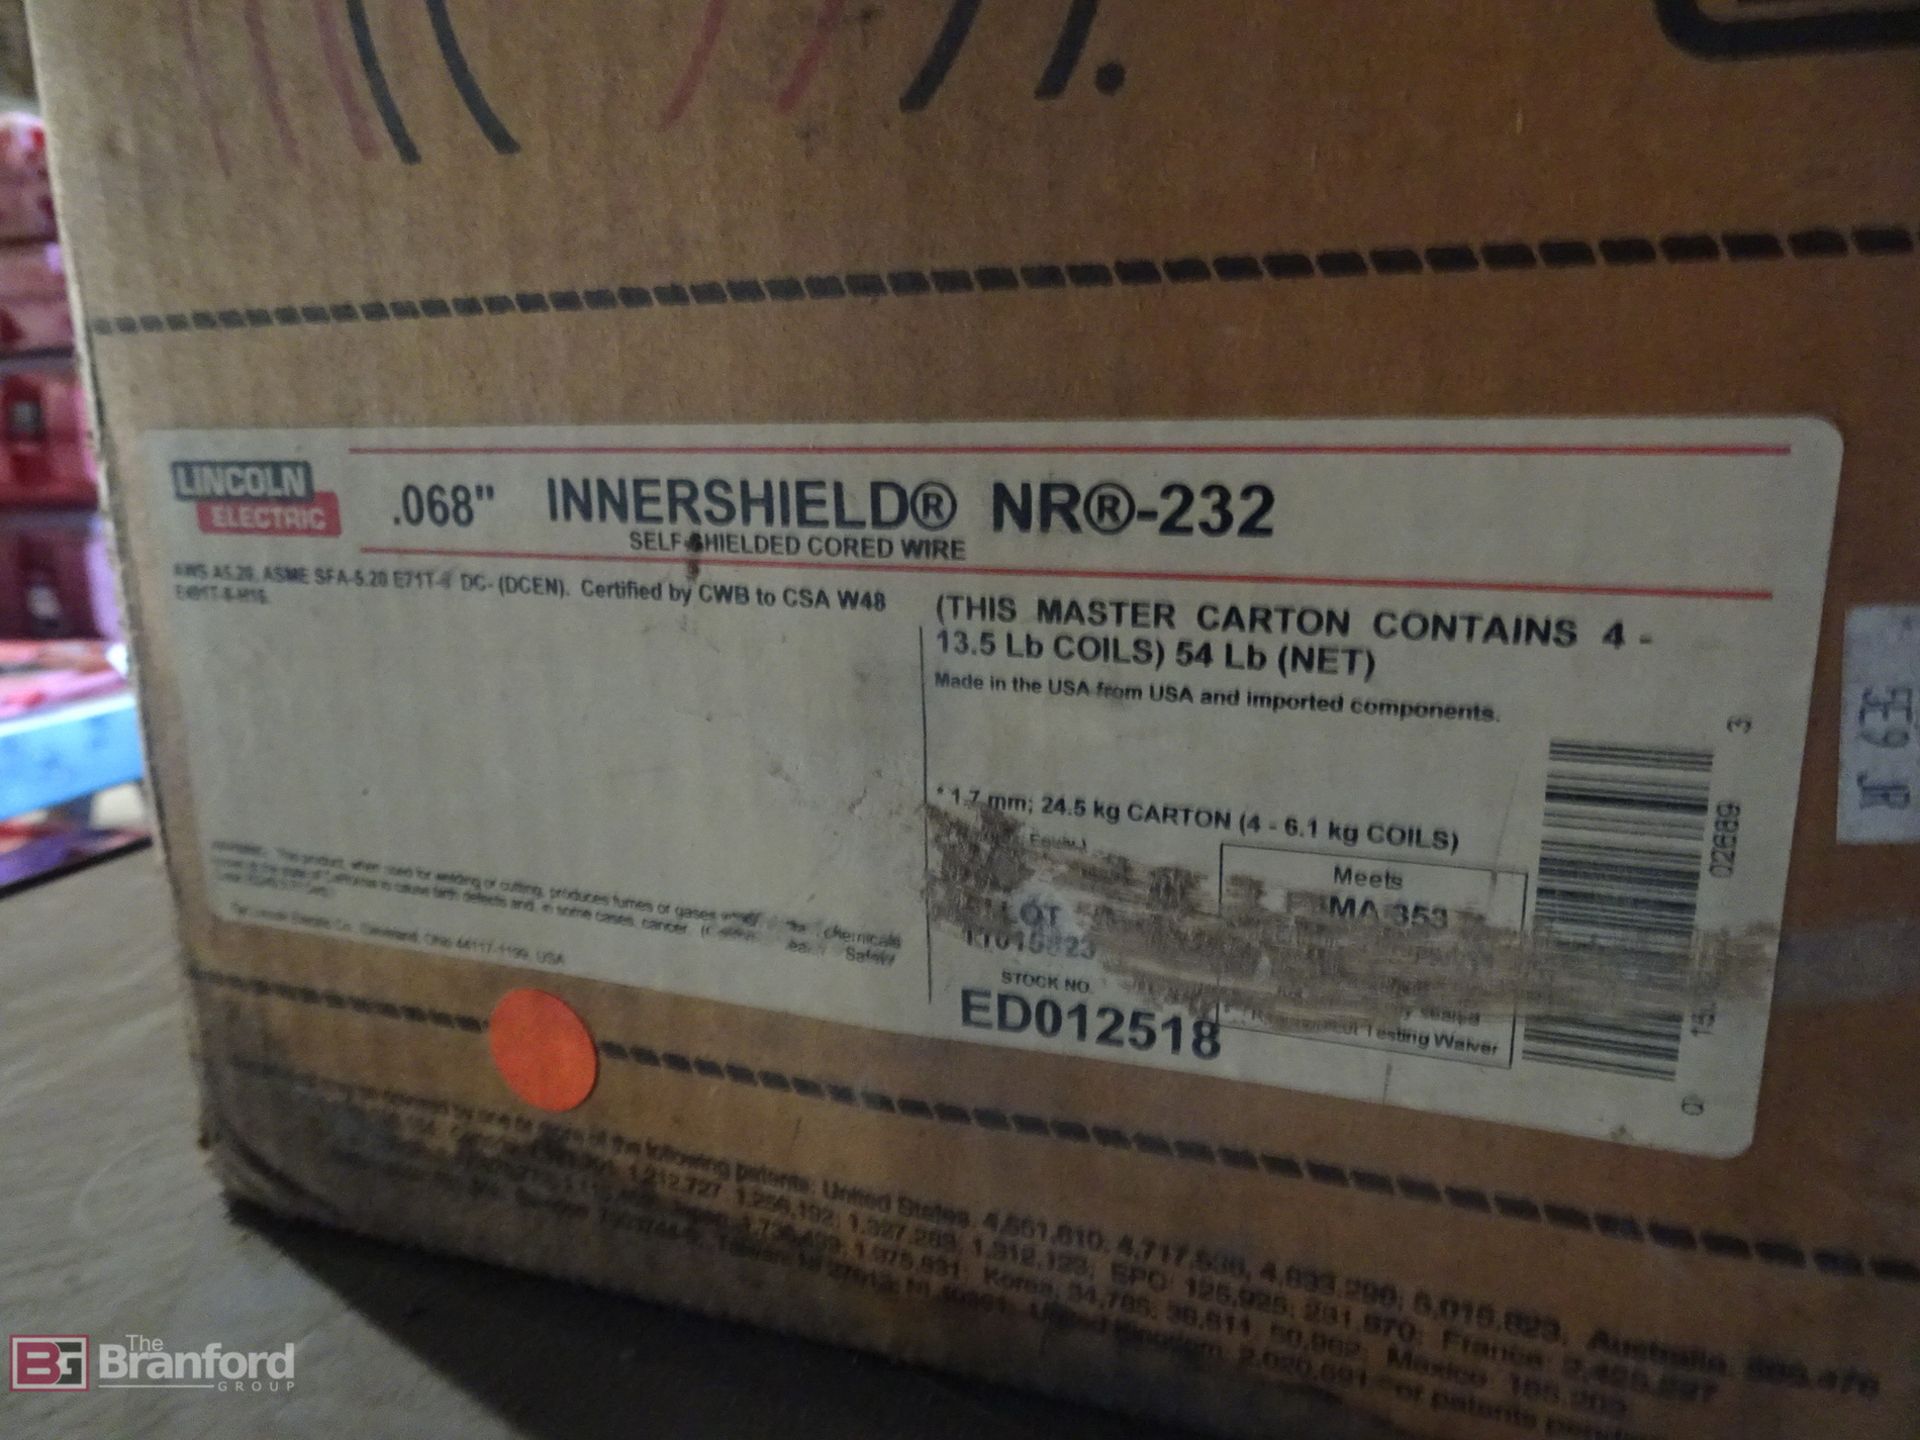 Lincoln Electric .068" Innershield NR-232 - Image 2 of 2